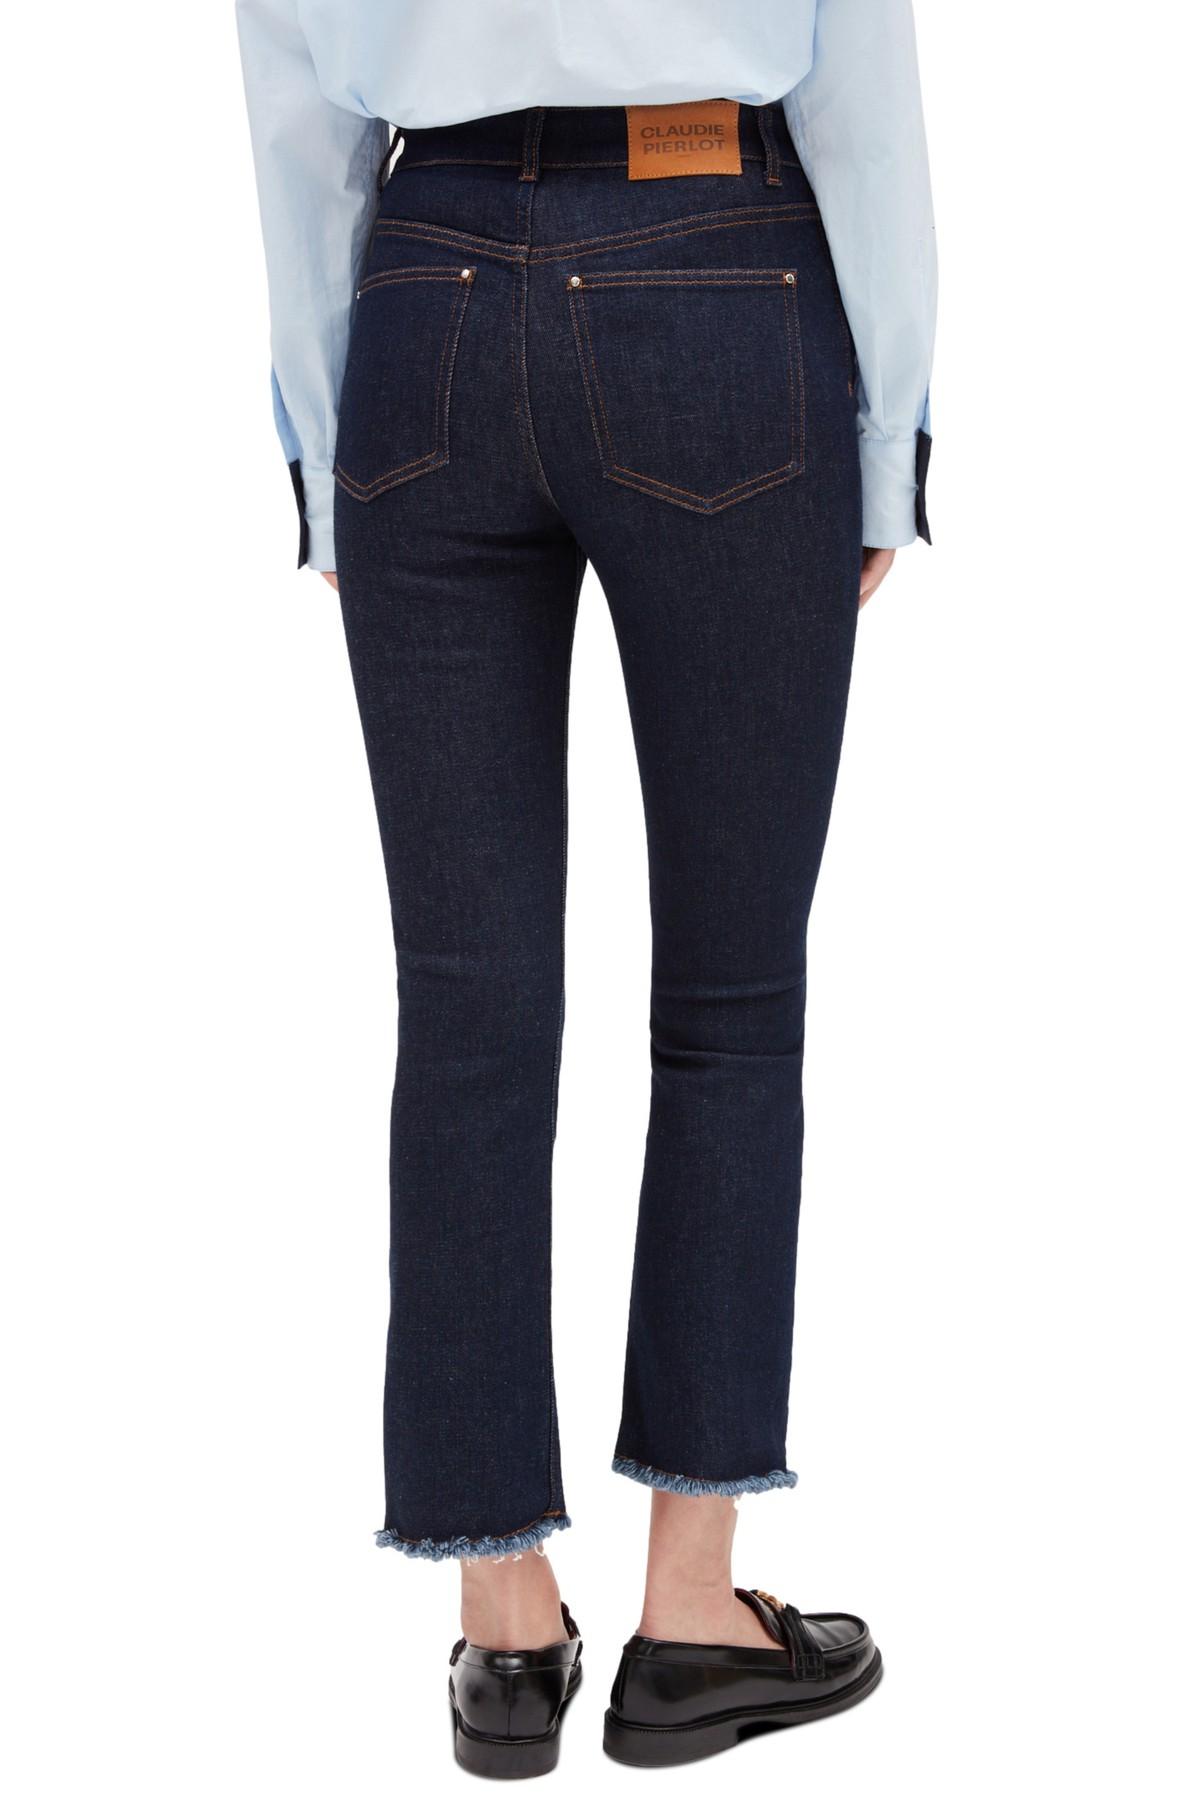 Claudie Pierlot High-waisted Raw Jeans in Blue | Lyst UK